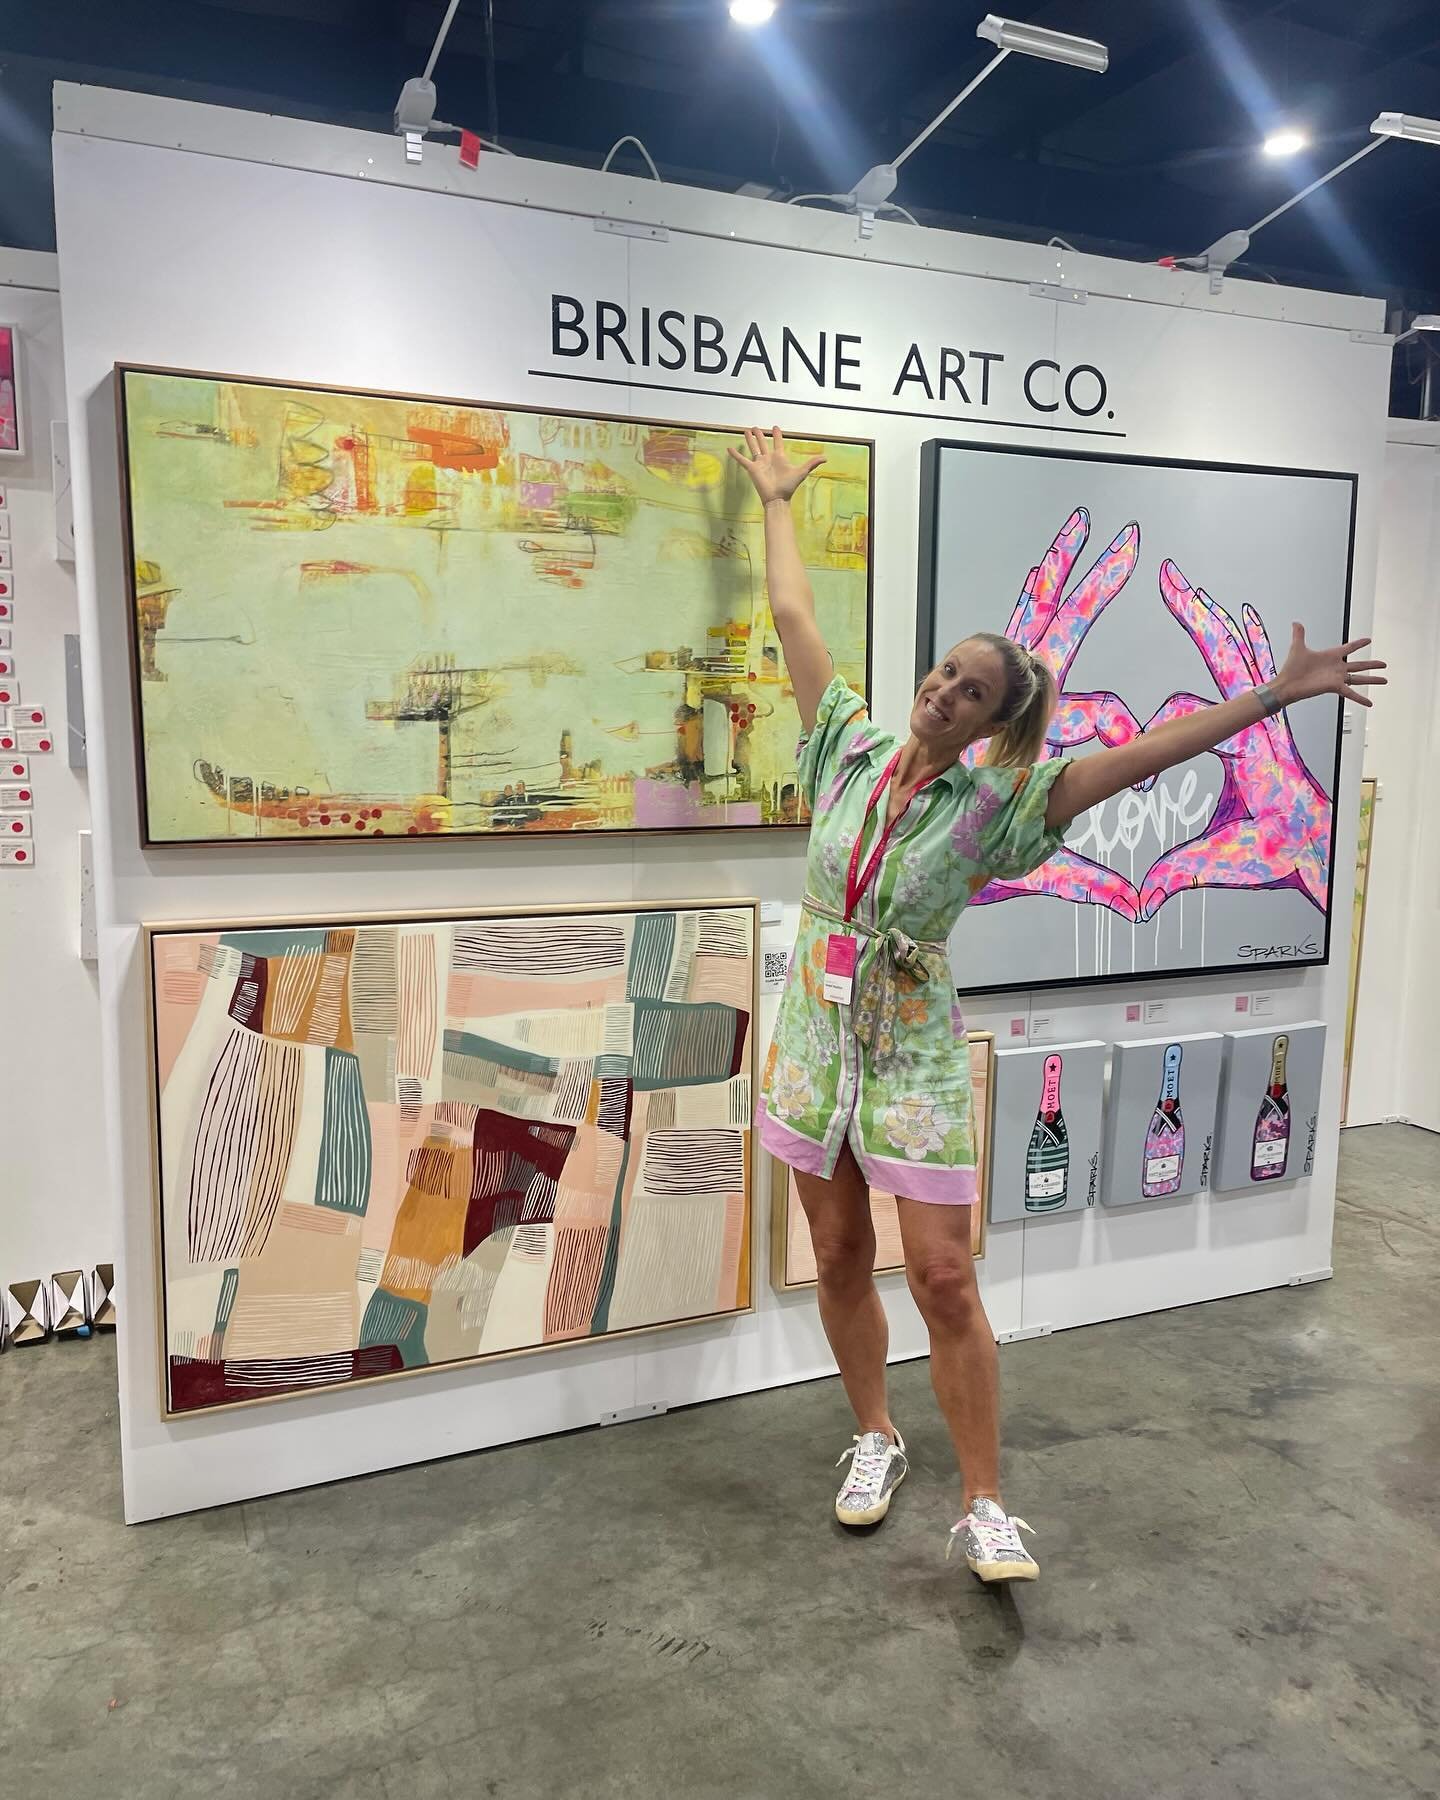 Last day of the @affordableartfairau 🩷 with my gals @brisbaneartco 

We are tired, delirious but still full of happiness and adrenaline ✨✨

Come on down and say hi and see some beautiful art xx here til 5pm 🩷